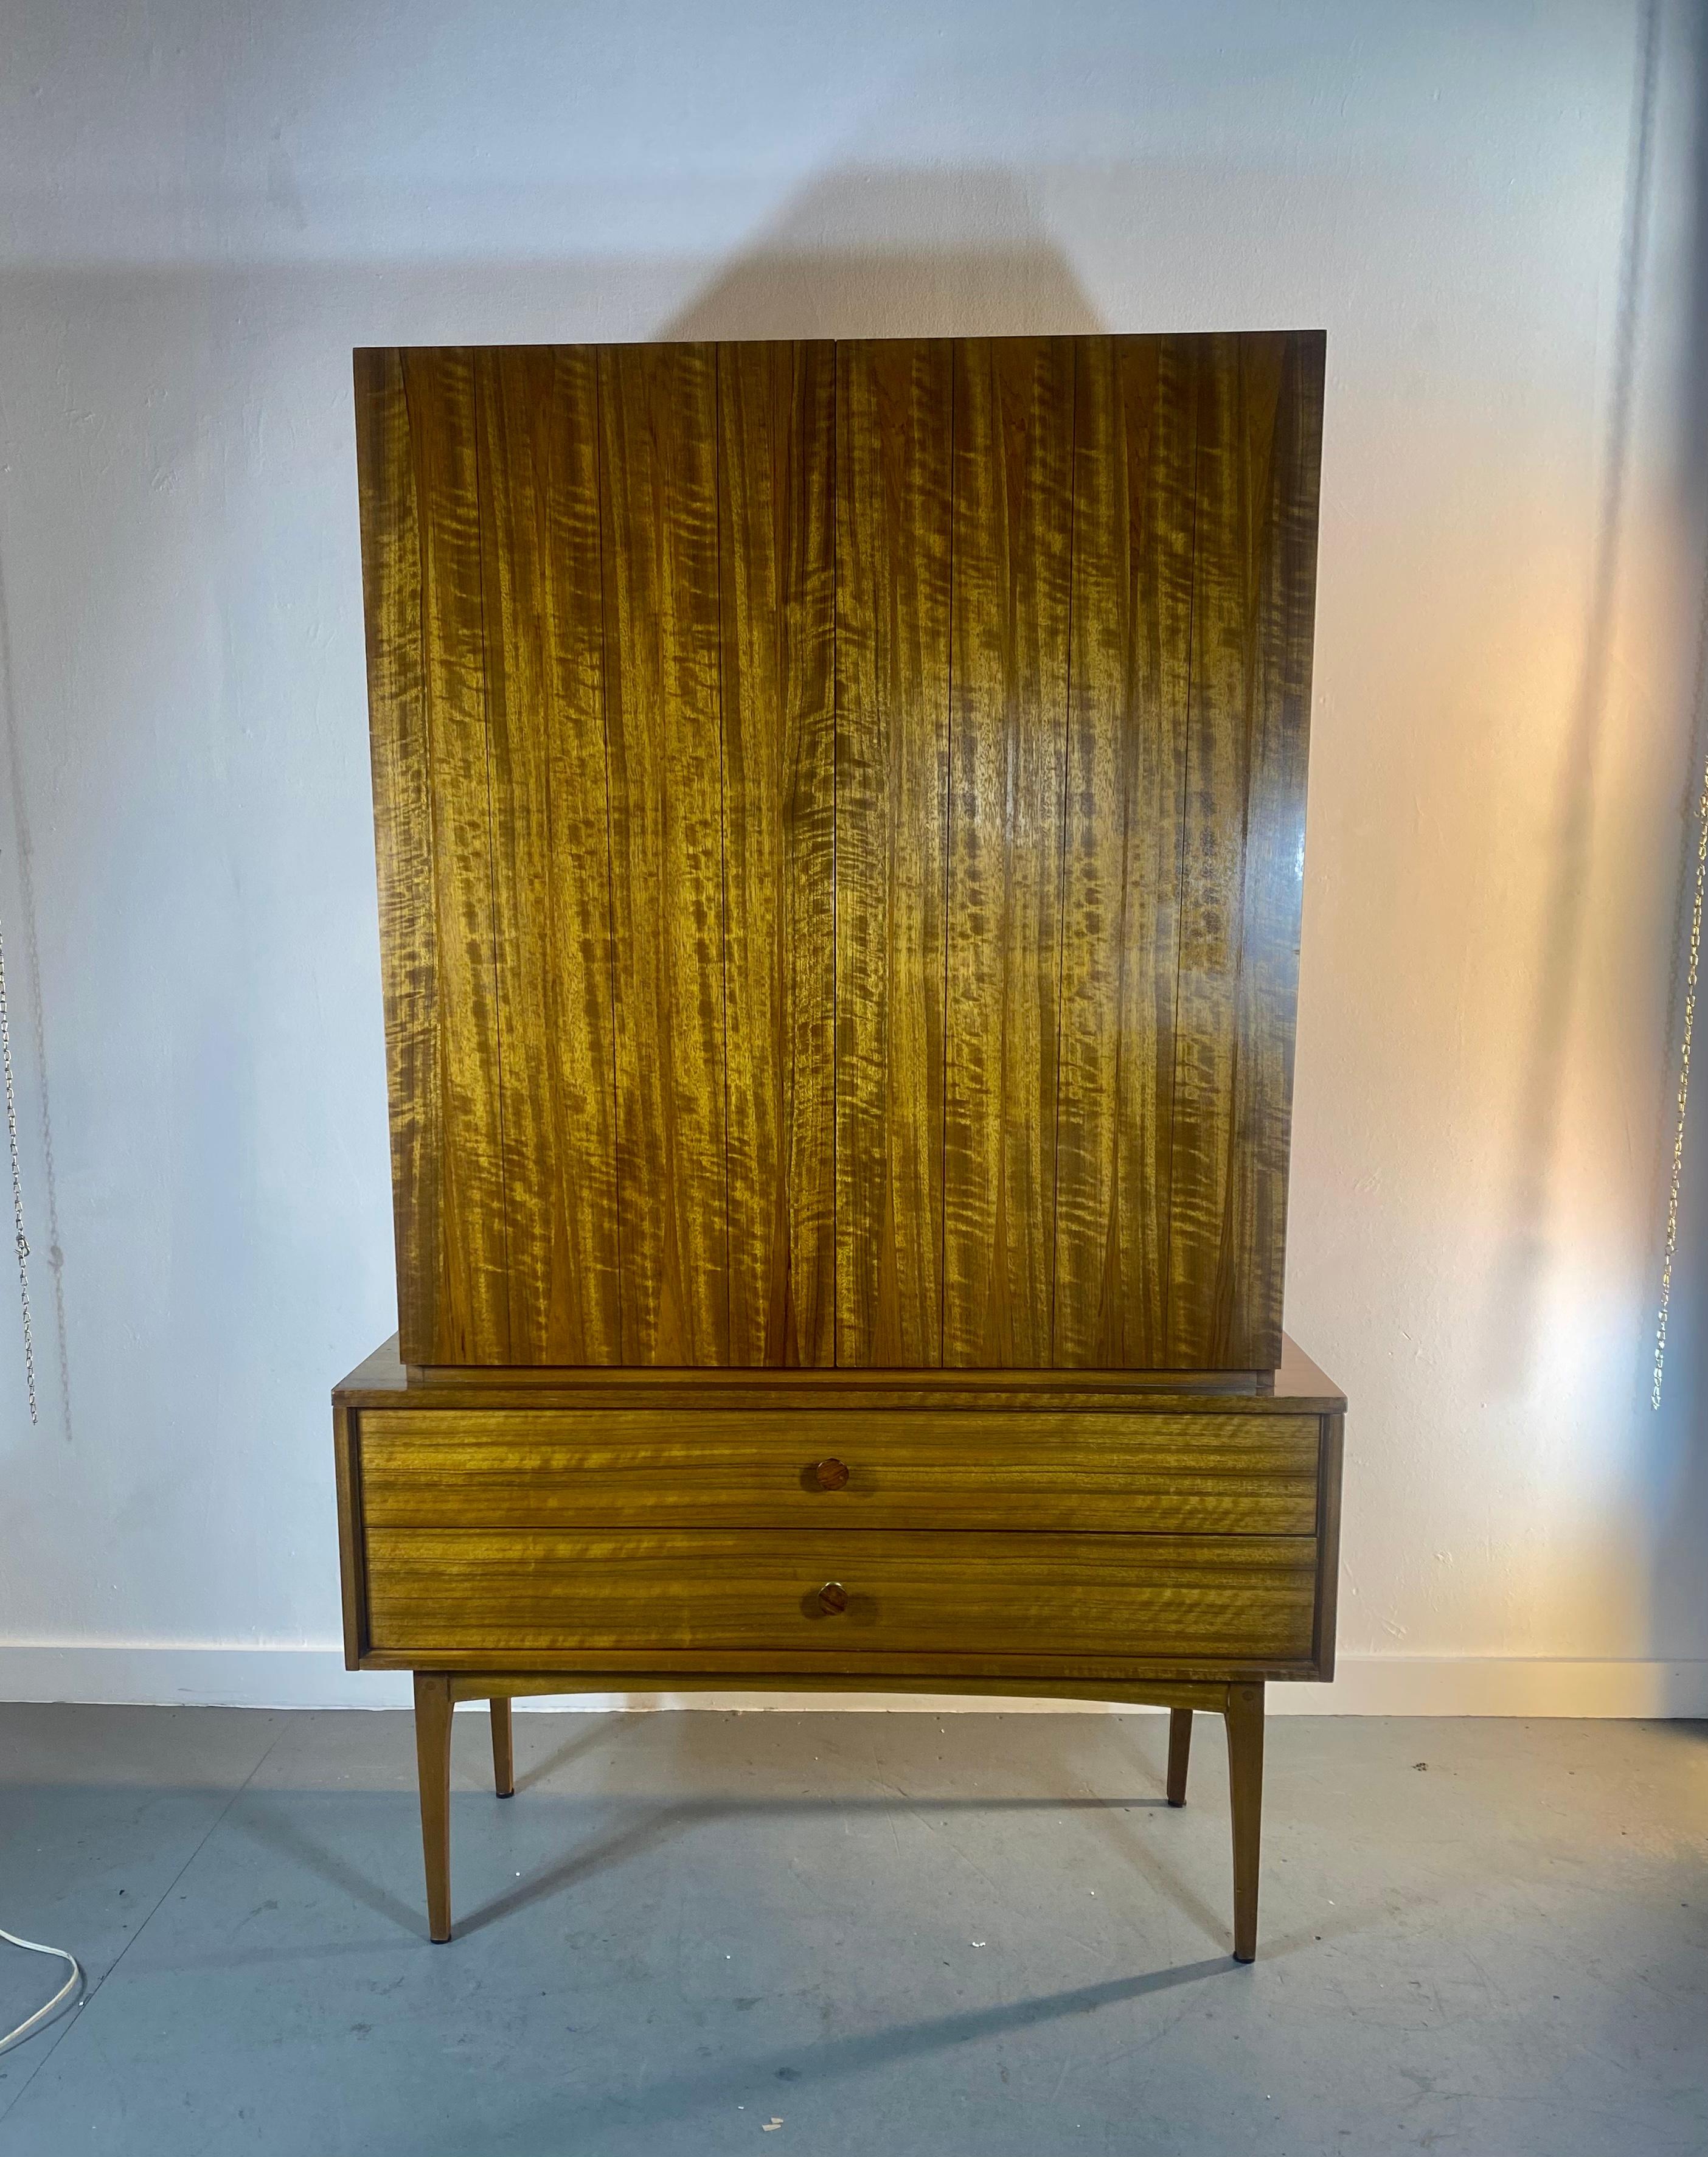 Extremely rare Lane Altavista, Gentleman's Chest / Armoire, flamed ribbon mahogany, rosewood and brass hand-pulls. Maple or birch interior, Classic modernist design. Truly stunning in person, two generous Size drawers / bottom. Two doors a-top three